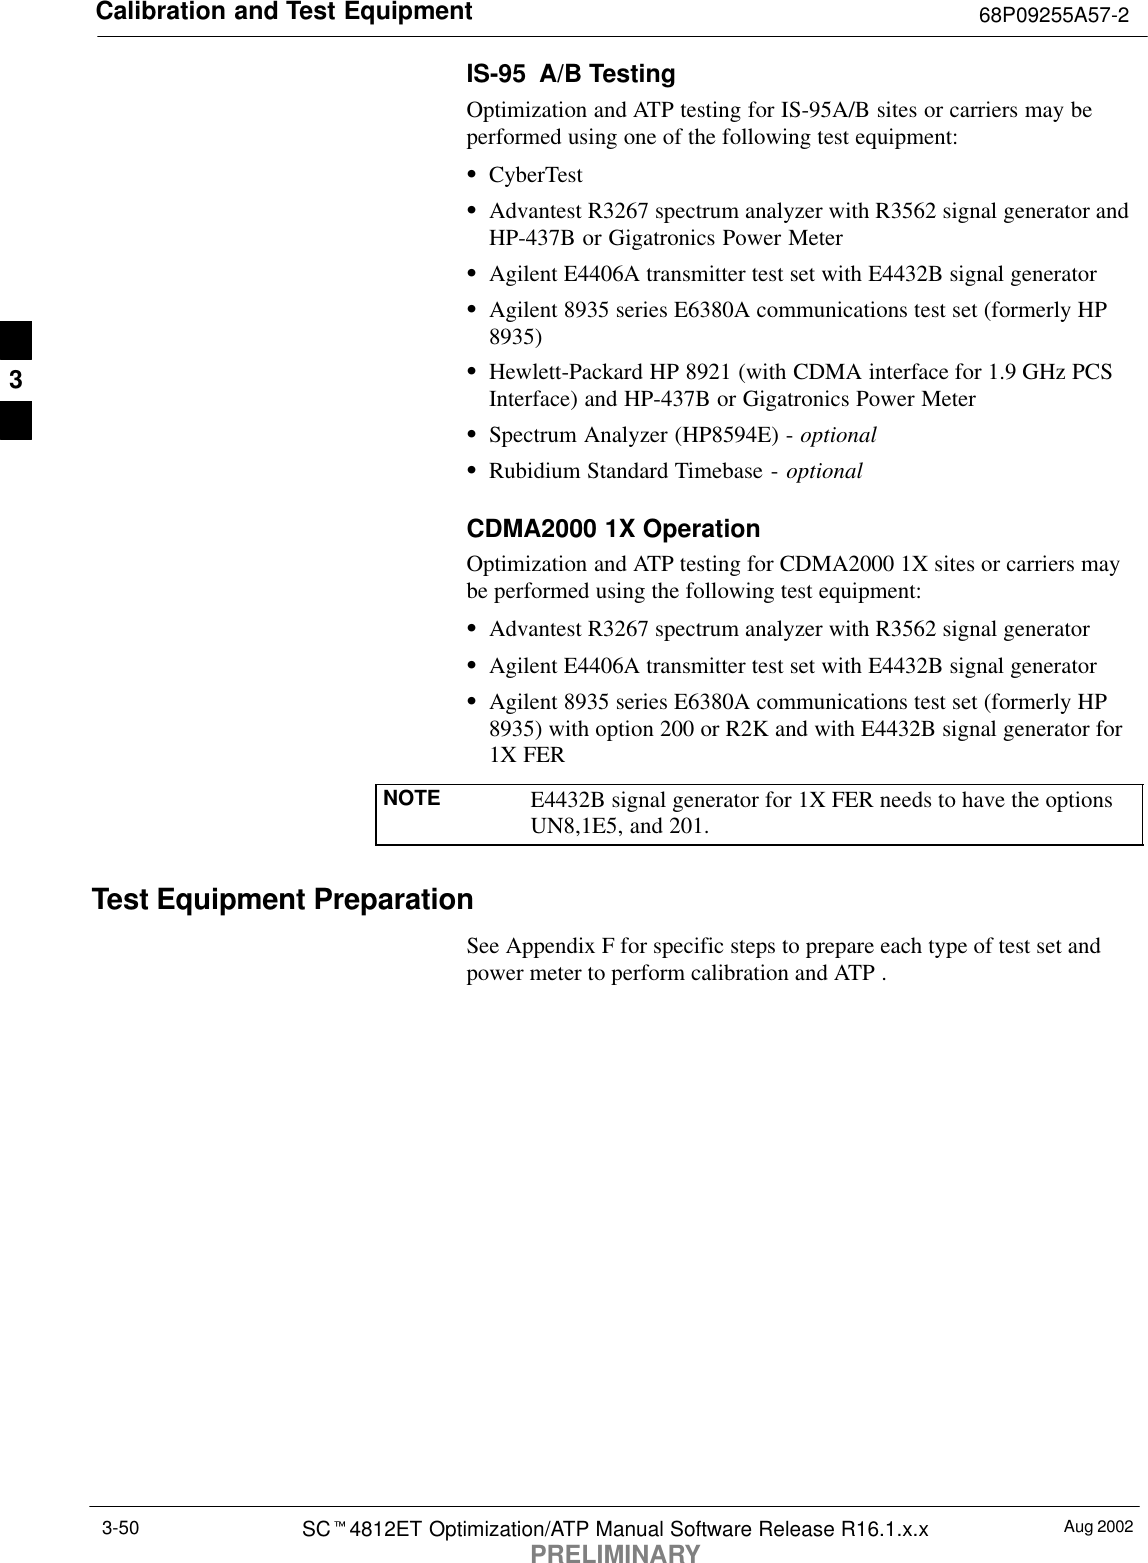 Calibration and Test Equipment 68P09255A57-2Aug 2002SCt4812ET Optimization/ATP Manual Software Release R16.1.x.xPRELIMINARY3-50IS-95  A/B TestingOptimization and ATP testing for IS-95A/B sites or carriers may beperformed using one of the following test equipment:SCyberTestSAdvantest R3267 spectrum analyzer with R3562 signal generator andHP-437B or Gigatronics Power MeterSAgilent E4406A transmitter test set with E4432B signal generatorSAgilent 8935 series E6380A communications test set (formerly HP8935)SHewlett-Packard HP 8921 (with CDMA interface for 1.9 GHz PCSInterface) and HP-437B or Gigatronics Power MeterSSpectrum Analyzer (HP8594E) - optionalSRubidium Standard Timebase - optionalCDMA2000 1X OperationOptimization and ATP testing for CDMA2000 1X sites or carriers maybe performed using the following test equipment:SAdvantest R3267 spectrum analyzer with R3562 signal generatorSAgilent E4406A transmitter test set with E4432B signal generatorSAgilent 8935 series E6380A communications test set (formerly HP8935) with option 200 or R2K and with E4432B signal generator for1X FERNOTE E4432B signal generator for 1X FER needs to have the optionsUN8,1E5, and 201.Test Equipment PreparationSee Appendix F for specific steps to prepare each type of test set andpower meter to perform calibration and ATP .3